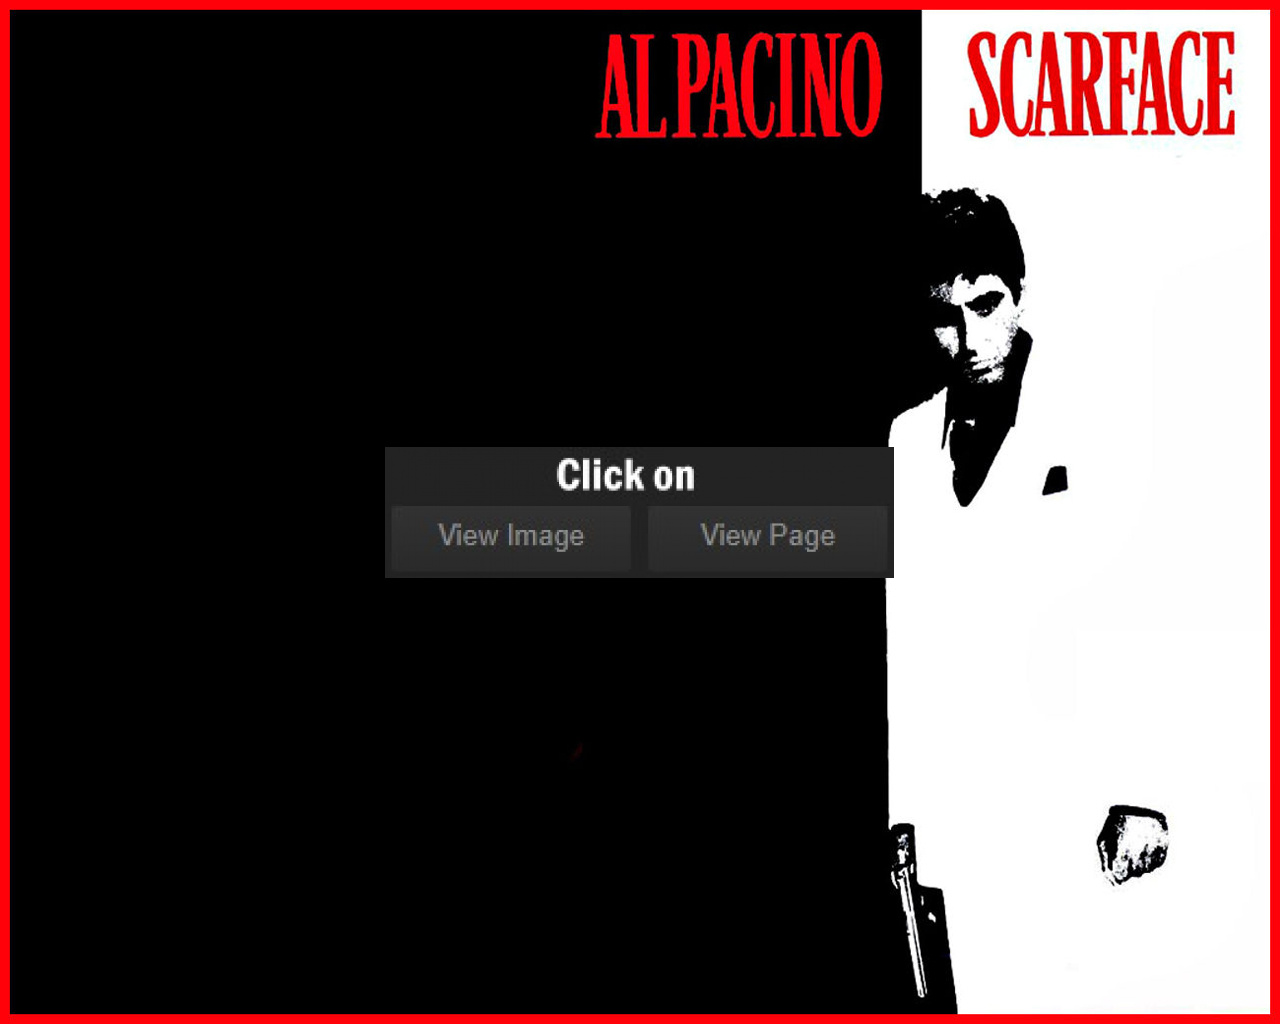 Manny Scarface Wallpapers